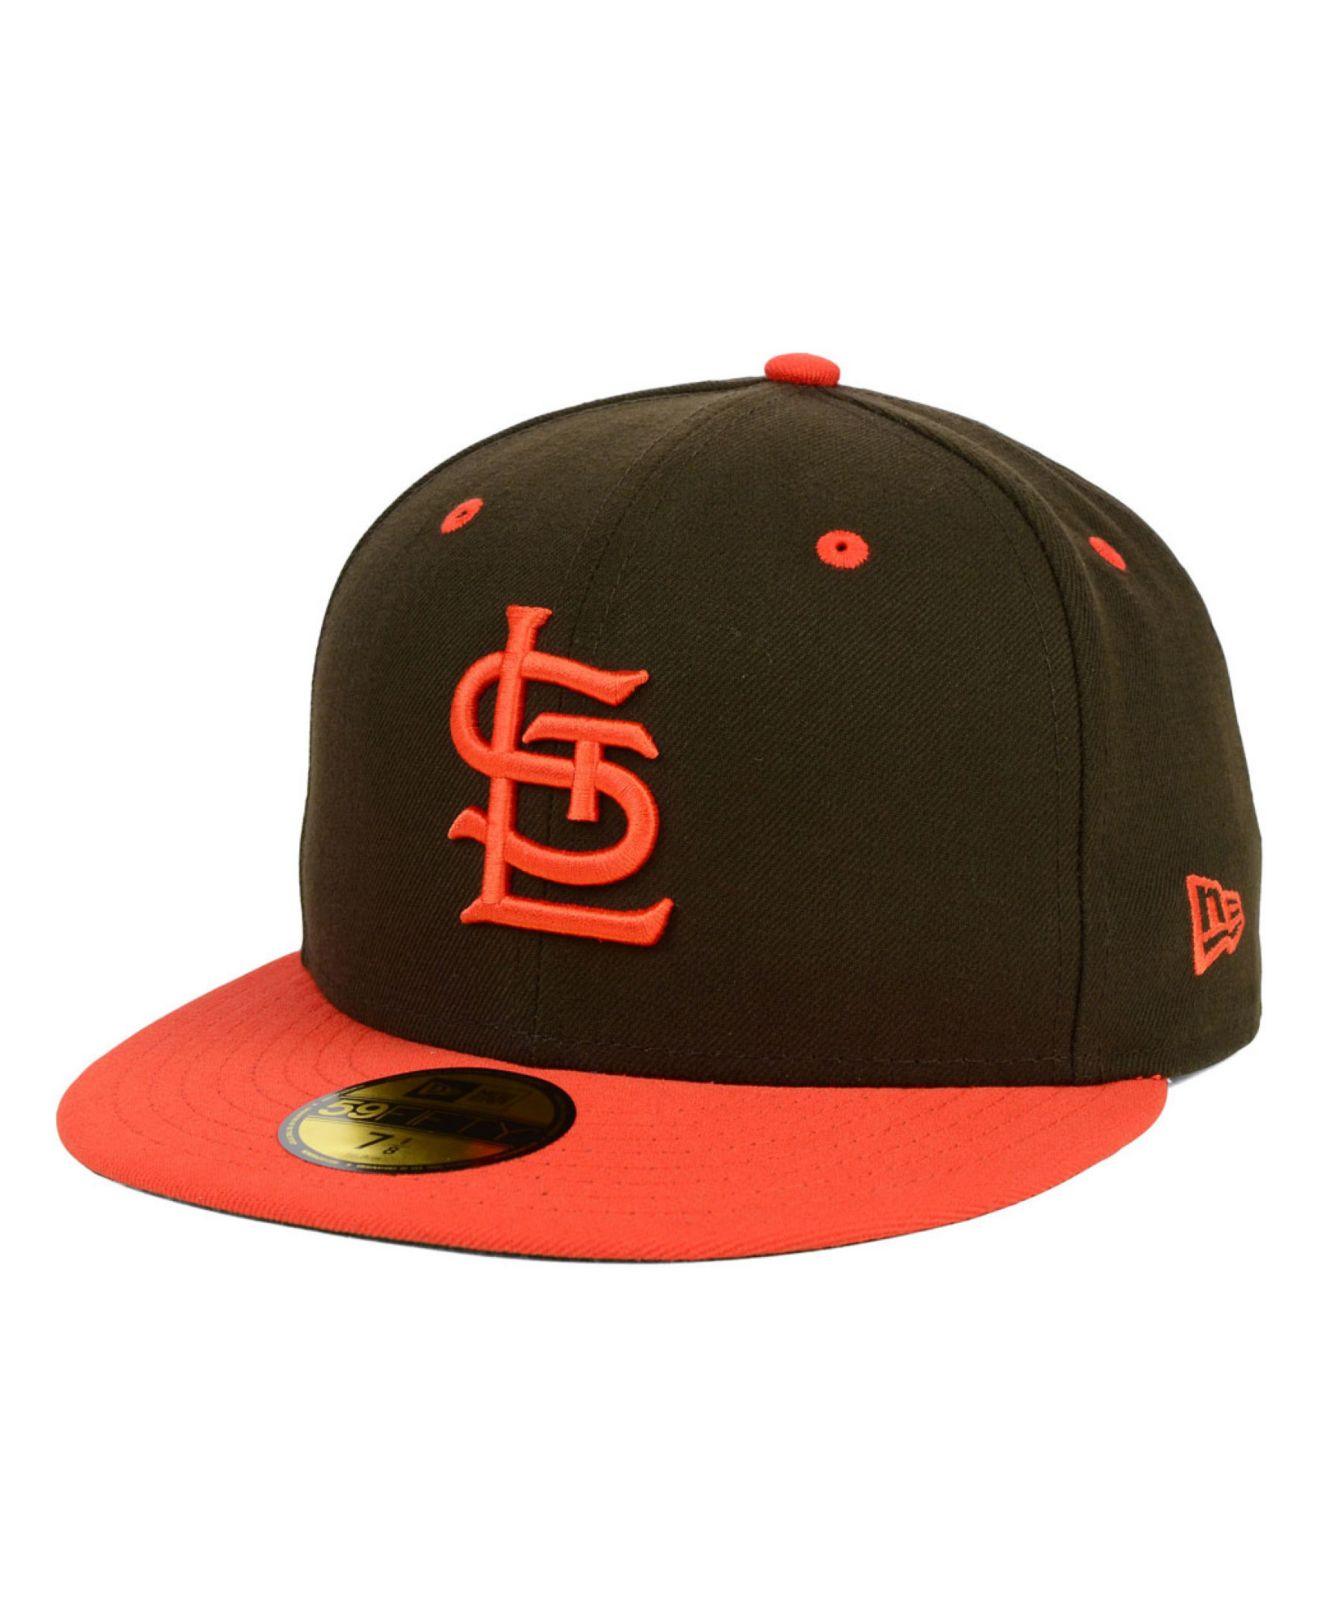 MLB St. Louis Browns Fitted Hat – Yesterday's Fits